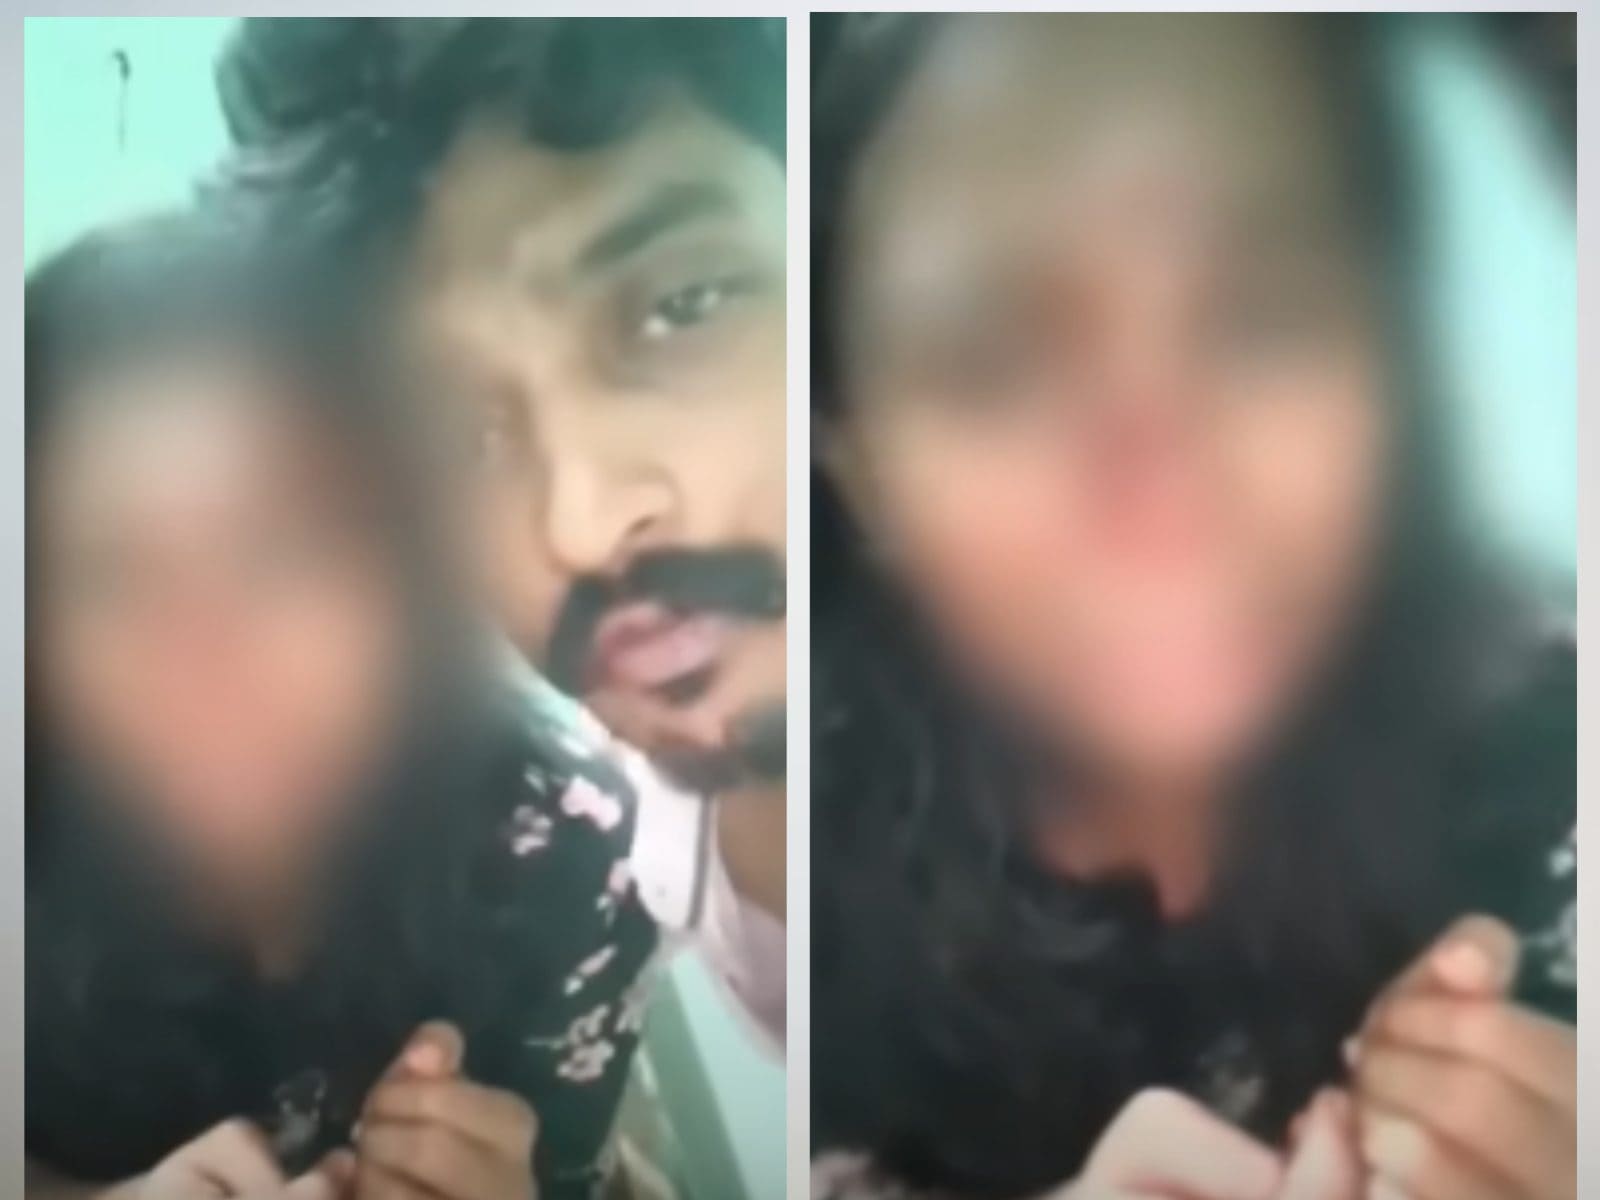 Kerala Man Thrashes Wife, Films Assault, Shares Video With Friends